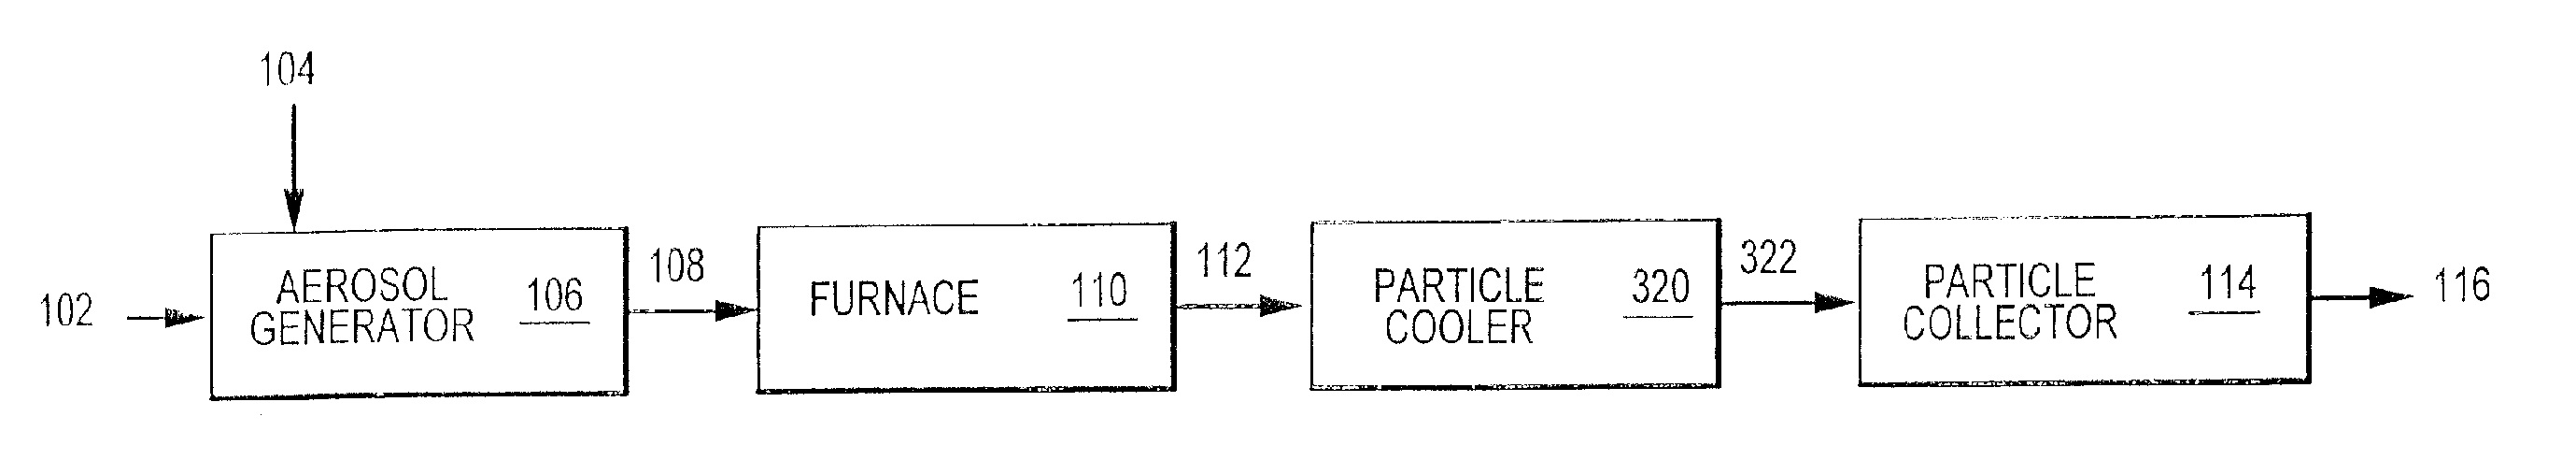 Coated nickel-containing powders, methods and apparatus for producing such powders and devices fabricated from same